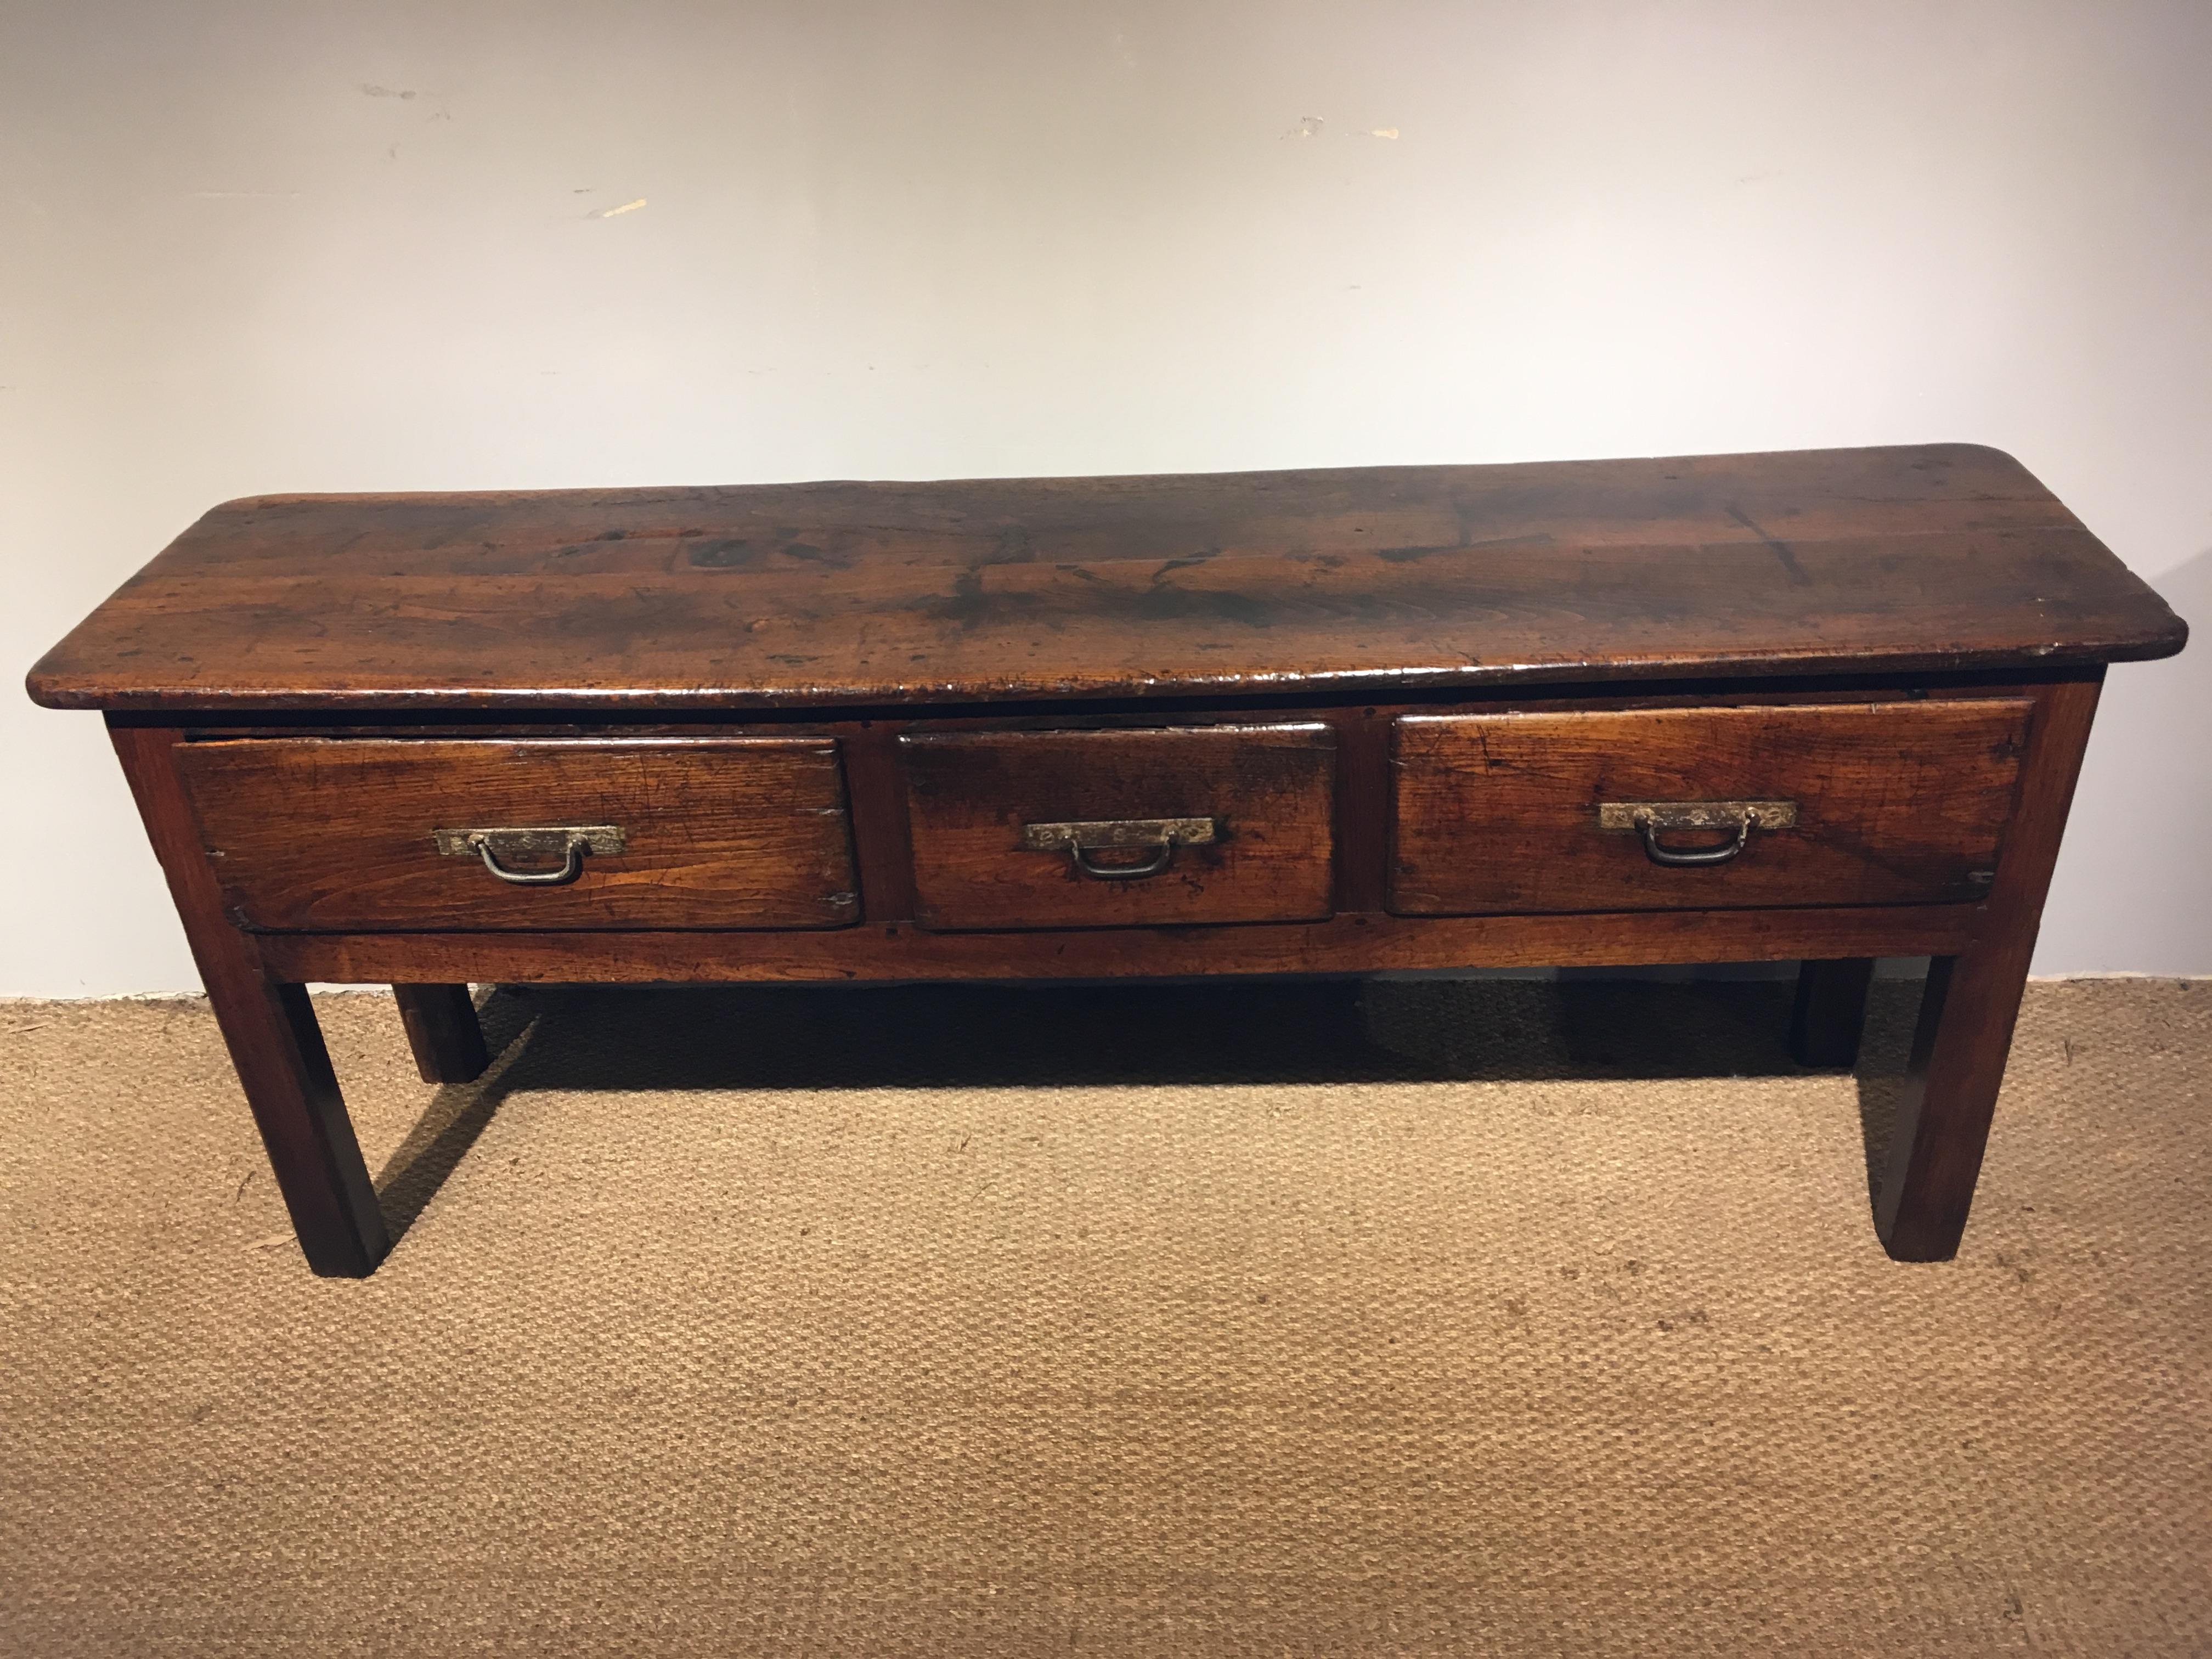 Great early 19th century oak dresser base, circa 1820.
Three large drawers with original iron handles, you can see how many times these have been lifted and dropped back down. 

This piece has been through our workshops cleaned/ polished great